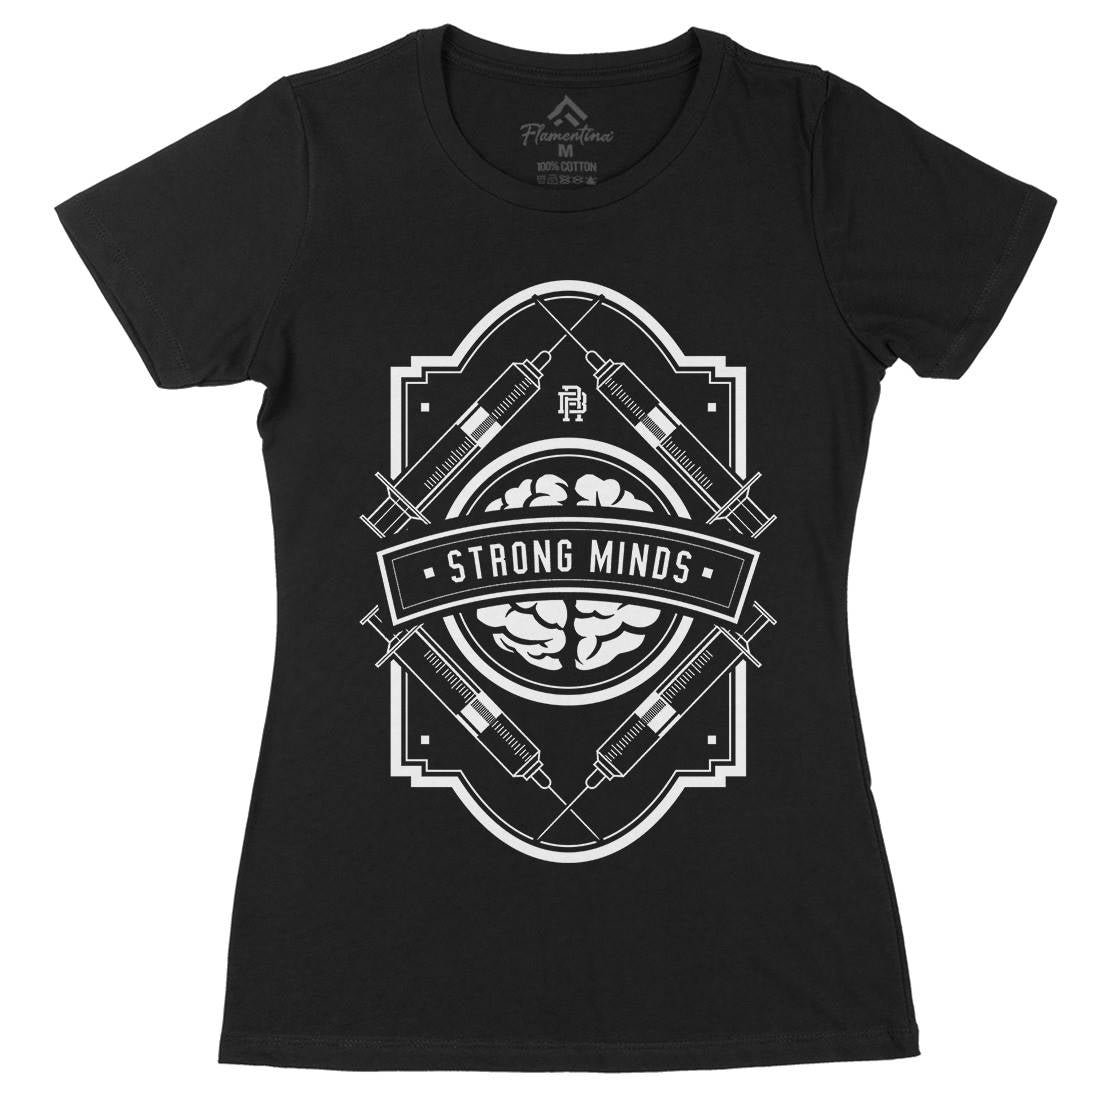 Strong Minds Womens Organic Crew Neck T-Shirt Quotes A288